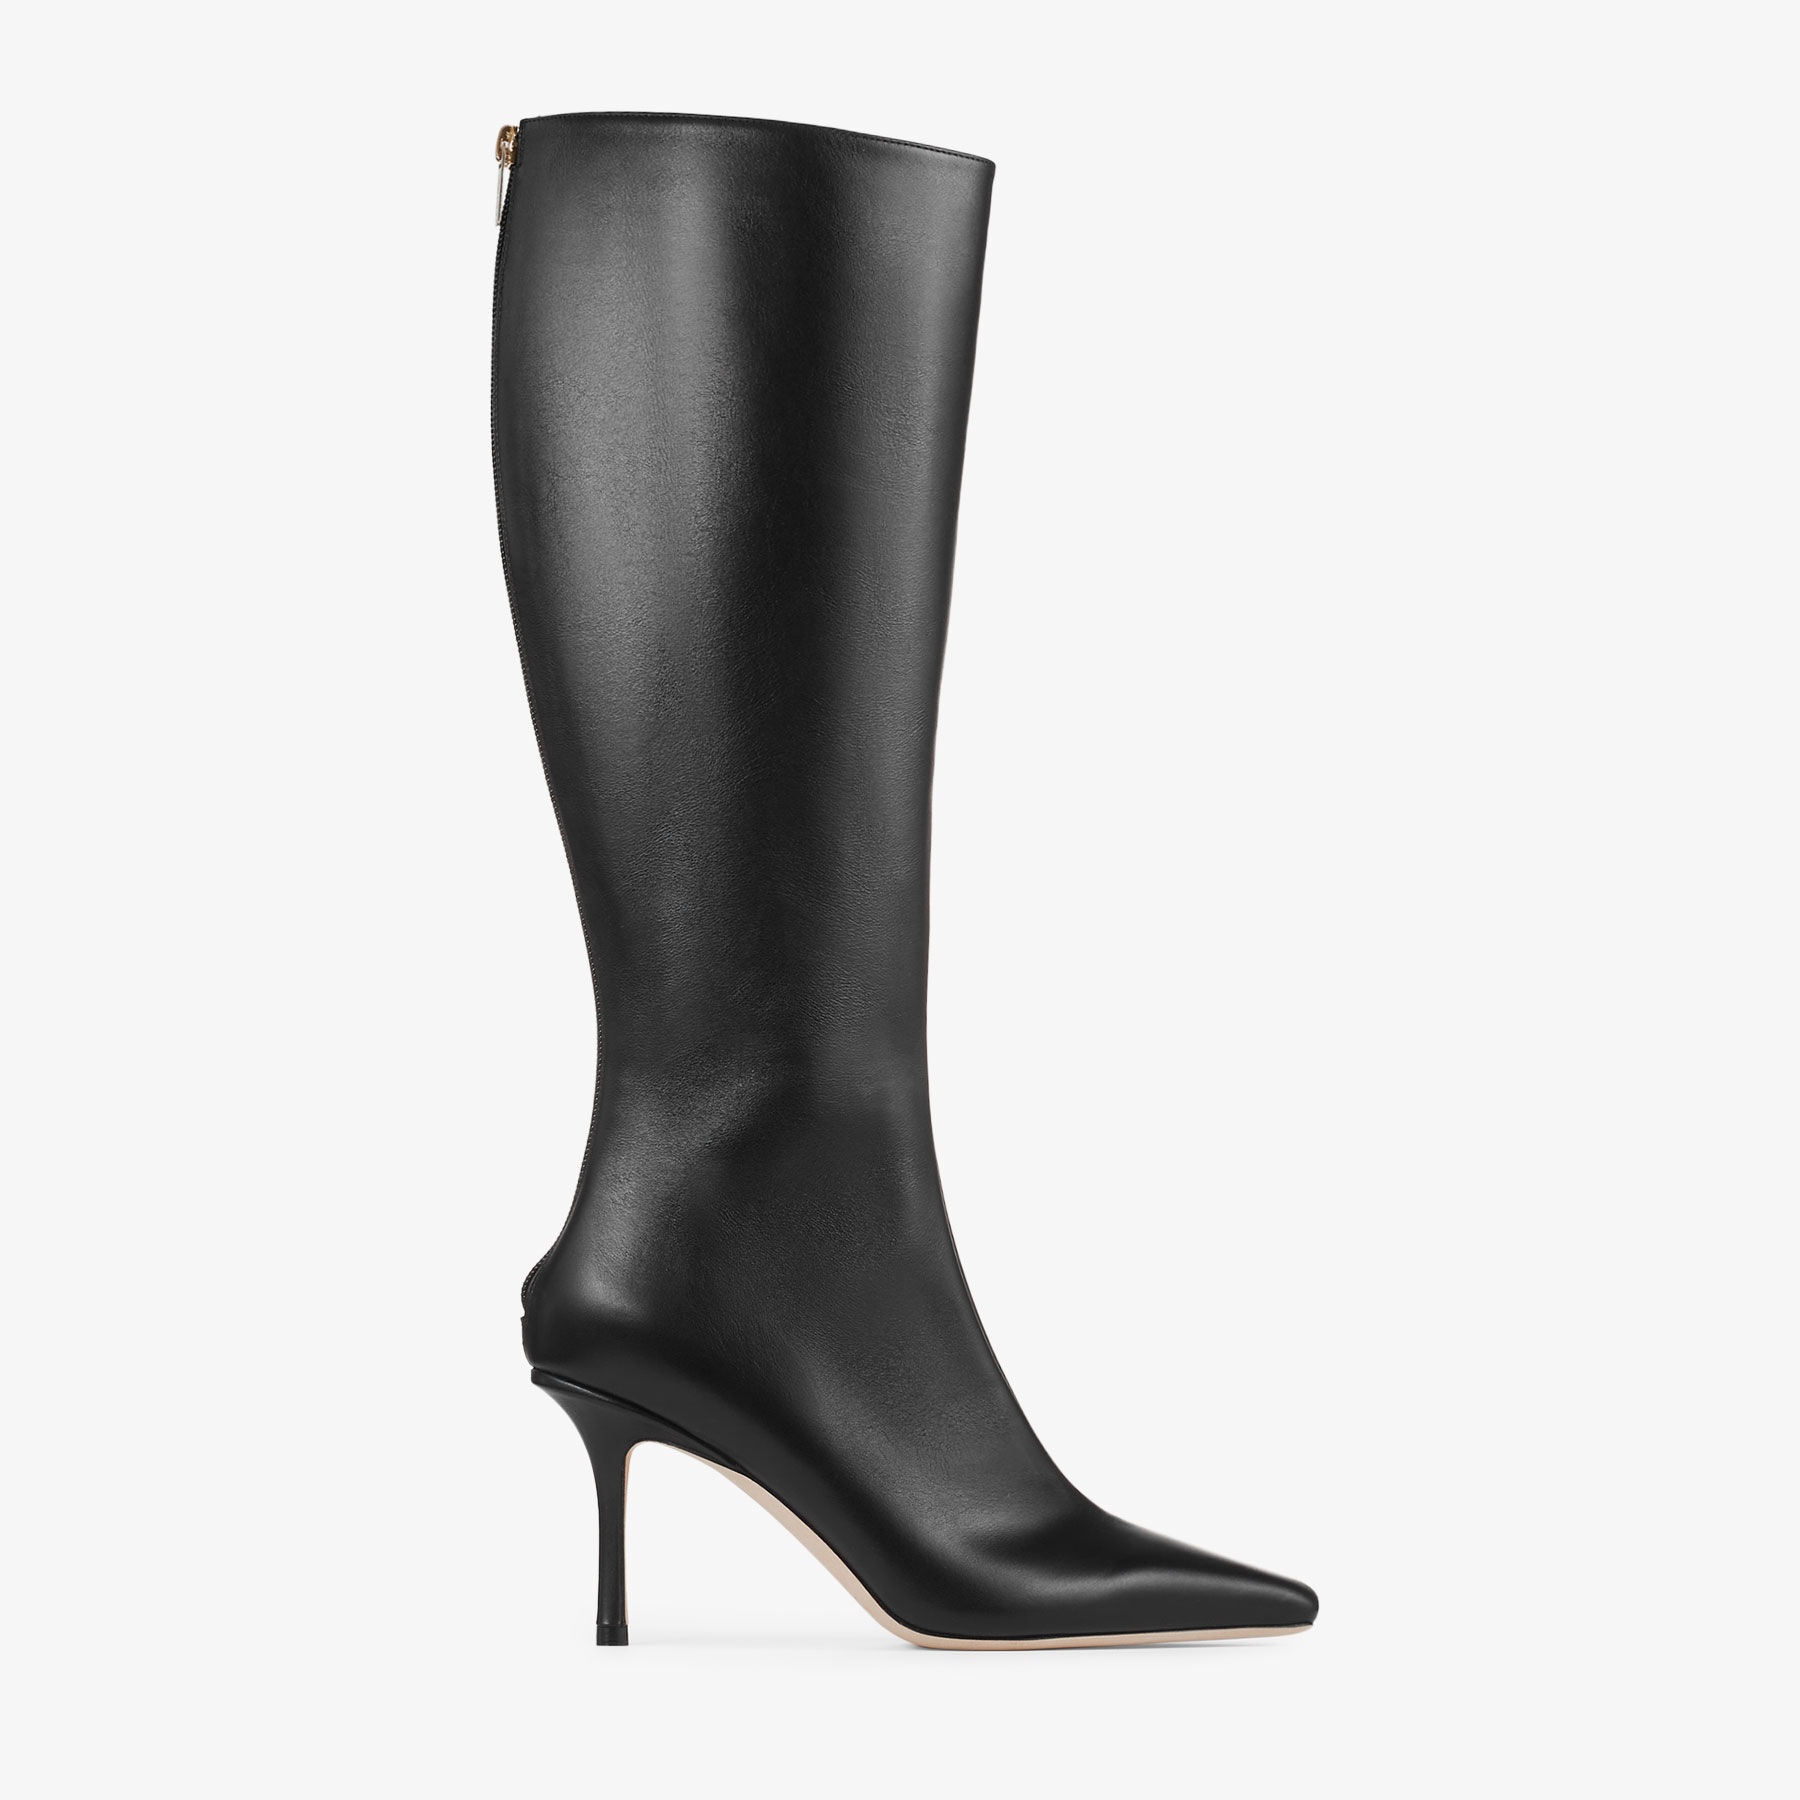 Agathe Knee Boot 85
Black Calf Leather Knee-High Boots - 1